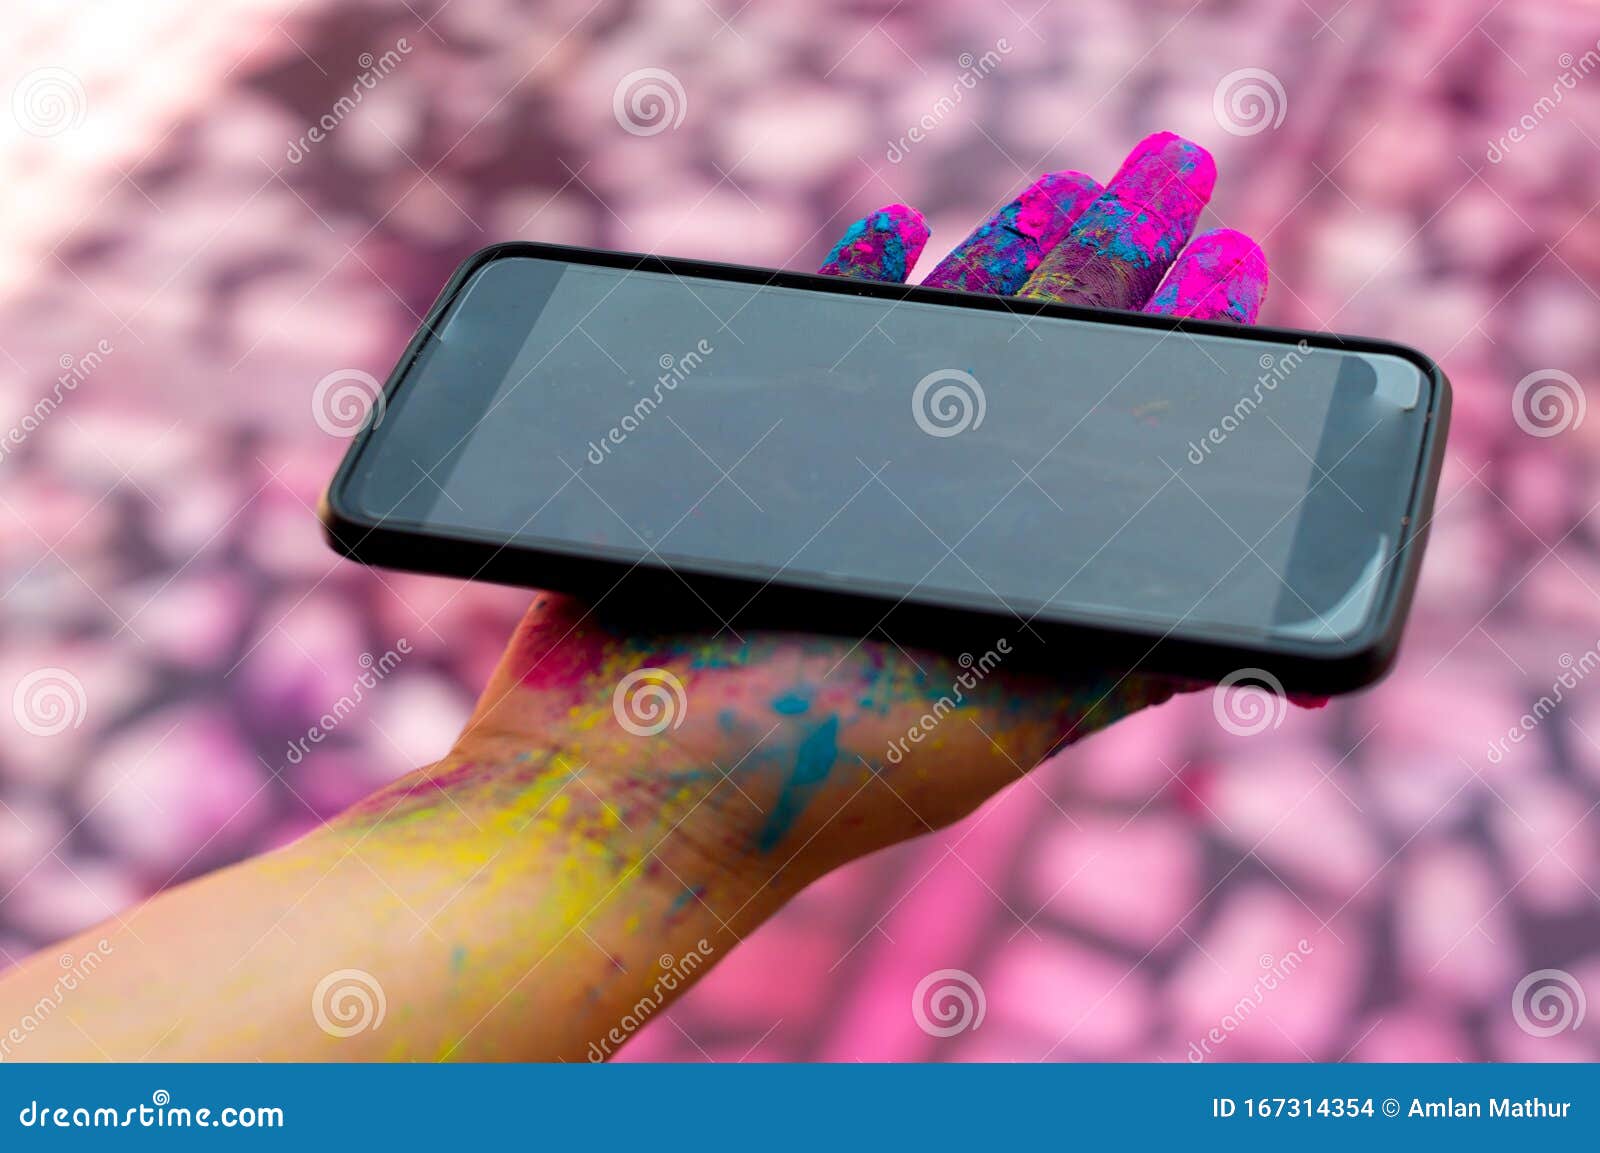 young girl with colored gulaal powder on her hands holding a mobile phone during the festival of holi